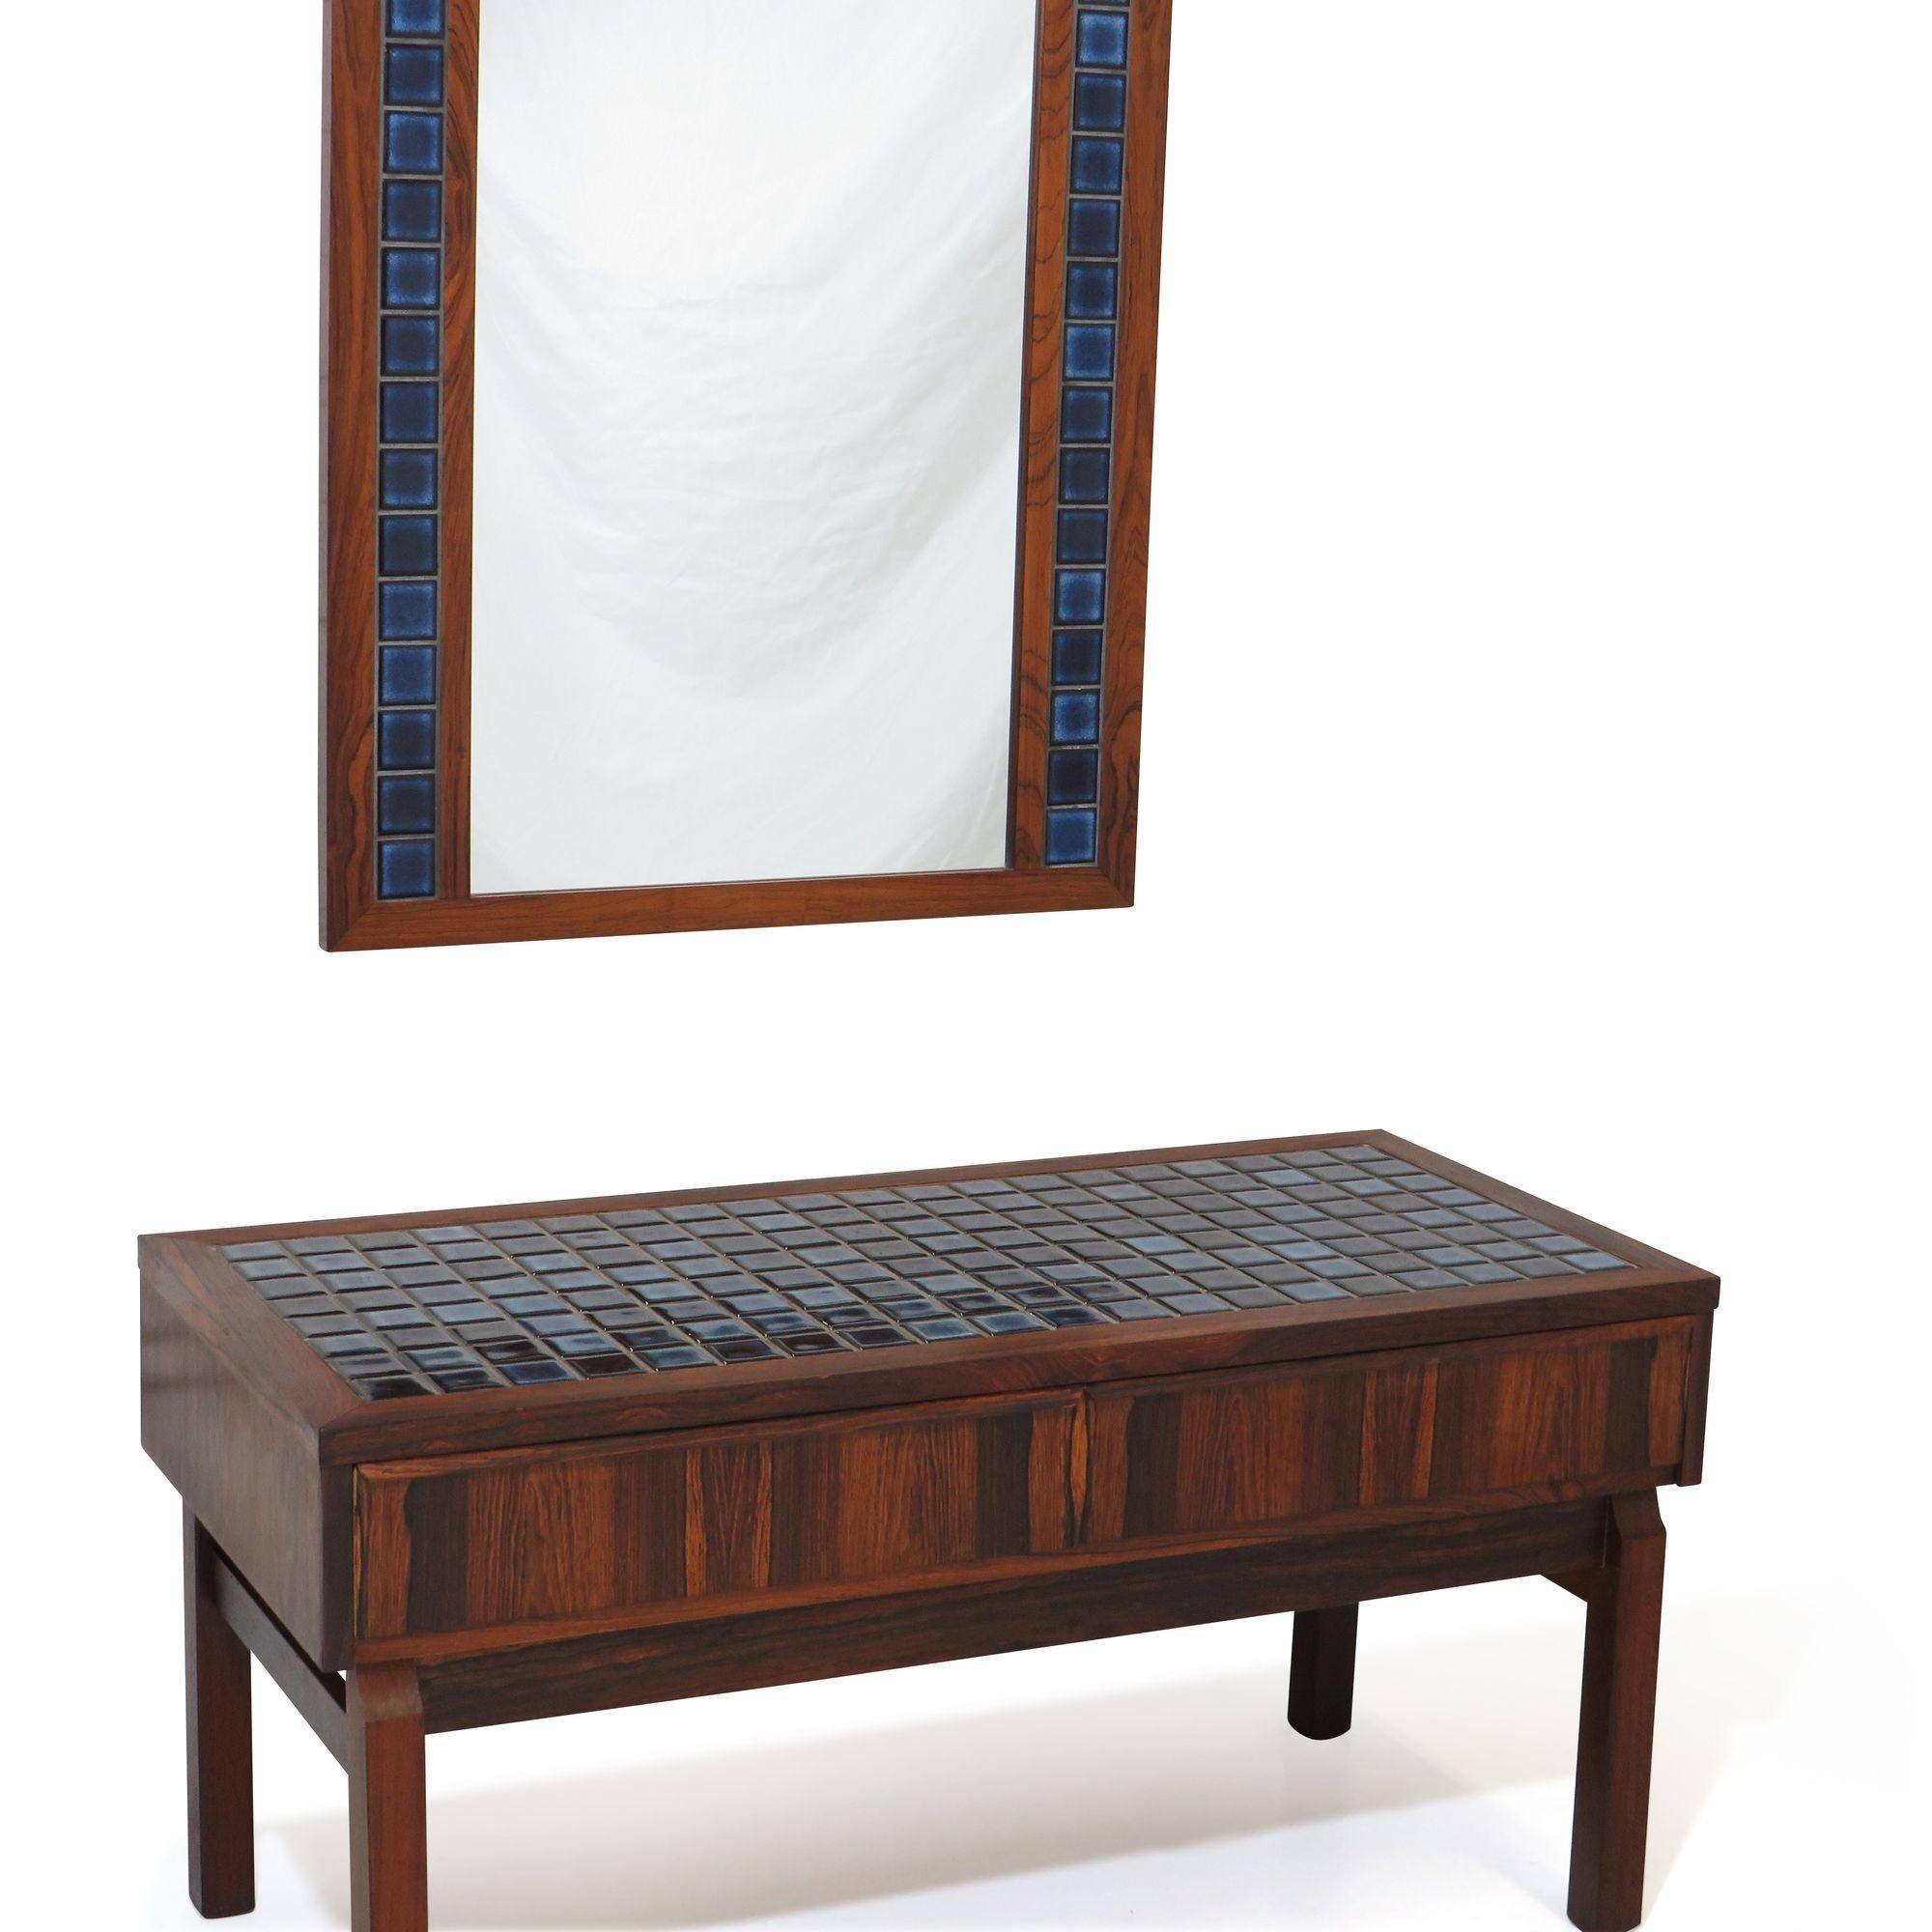 Danish entry cabinet and mirror crafted of rosewood with blue tile inlay, two small drawers for storage, raised on squared rosewood legs. Excellent condition with minor signs of age and use.
 
Cabinet measurements 
W 35.38'' x D 16.25'' x H